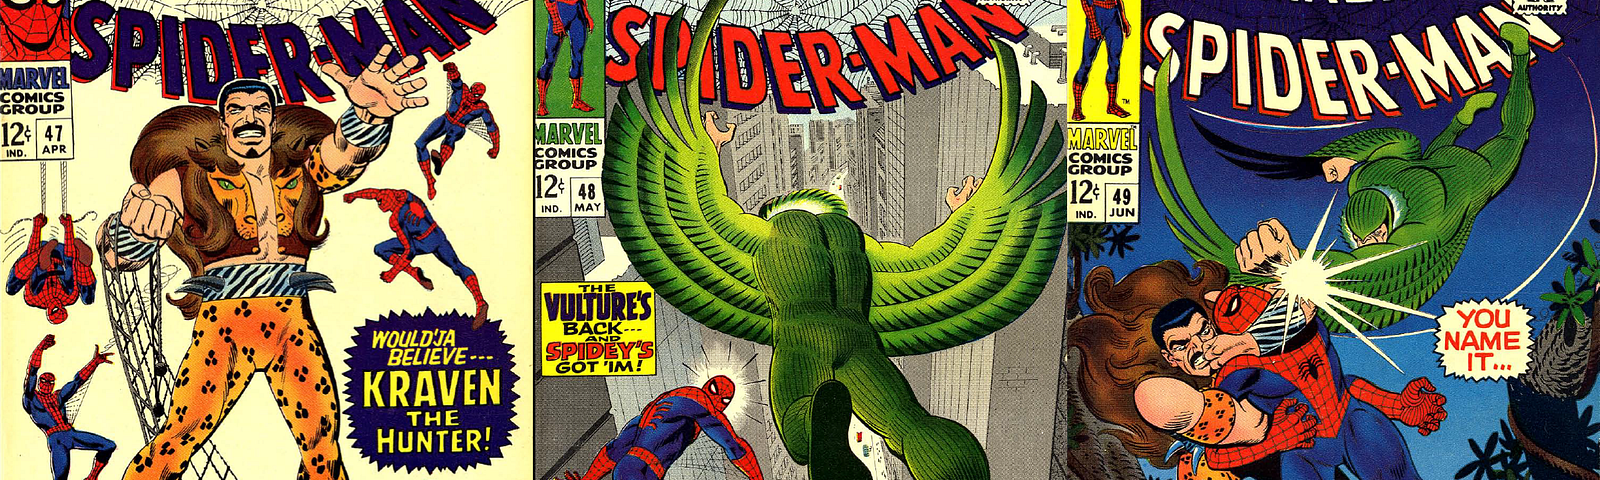 The covers to The Amazing Spider-Man #47–49. Spidey battles Kraven the Hunter and the Vulture.